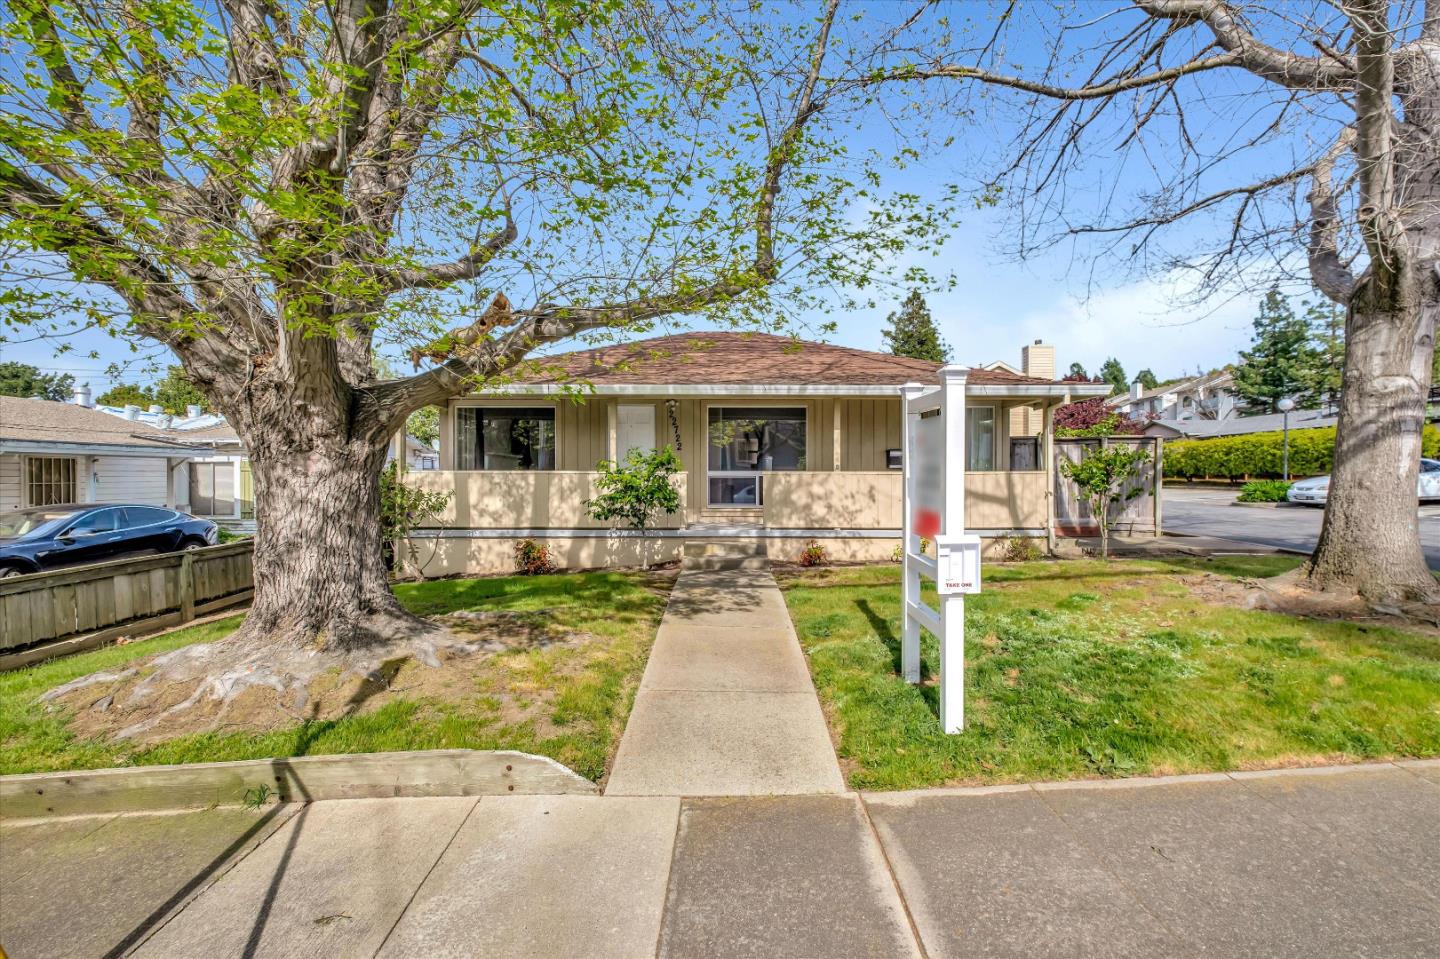 Photo of 22722 7th St in Hayward, CA